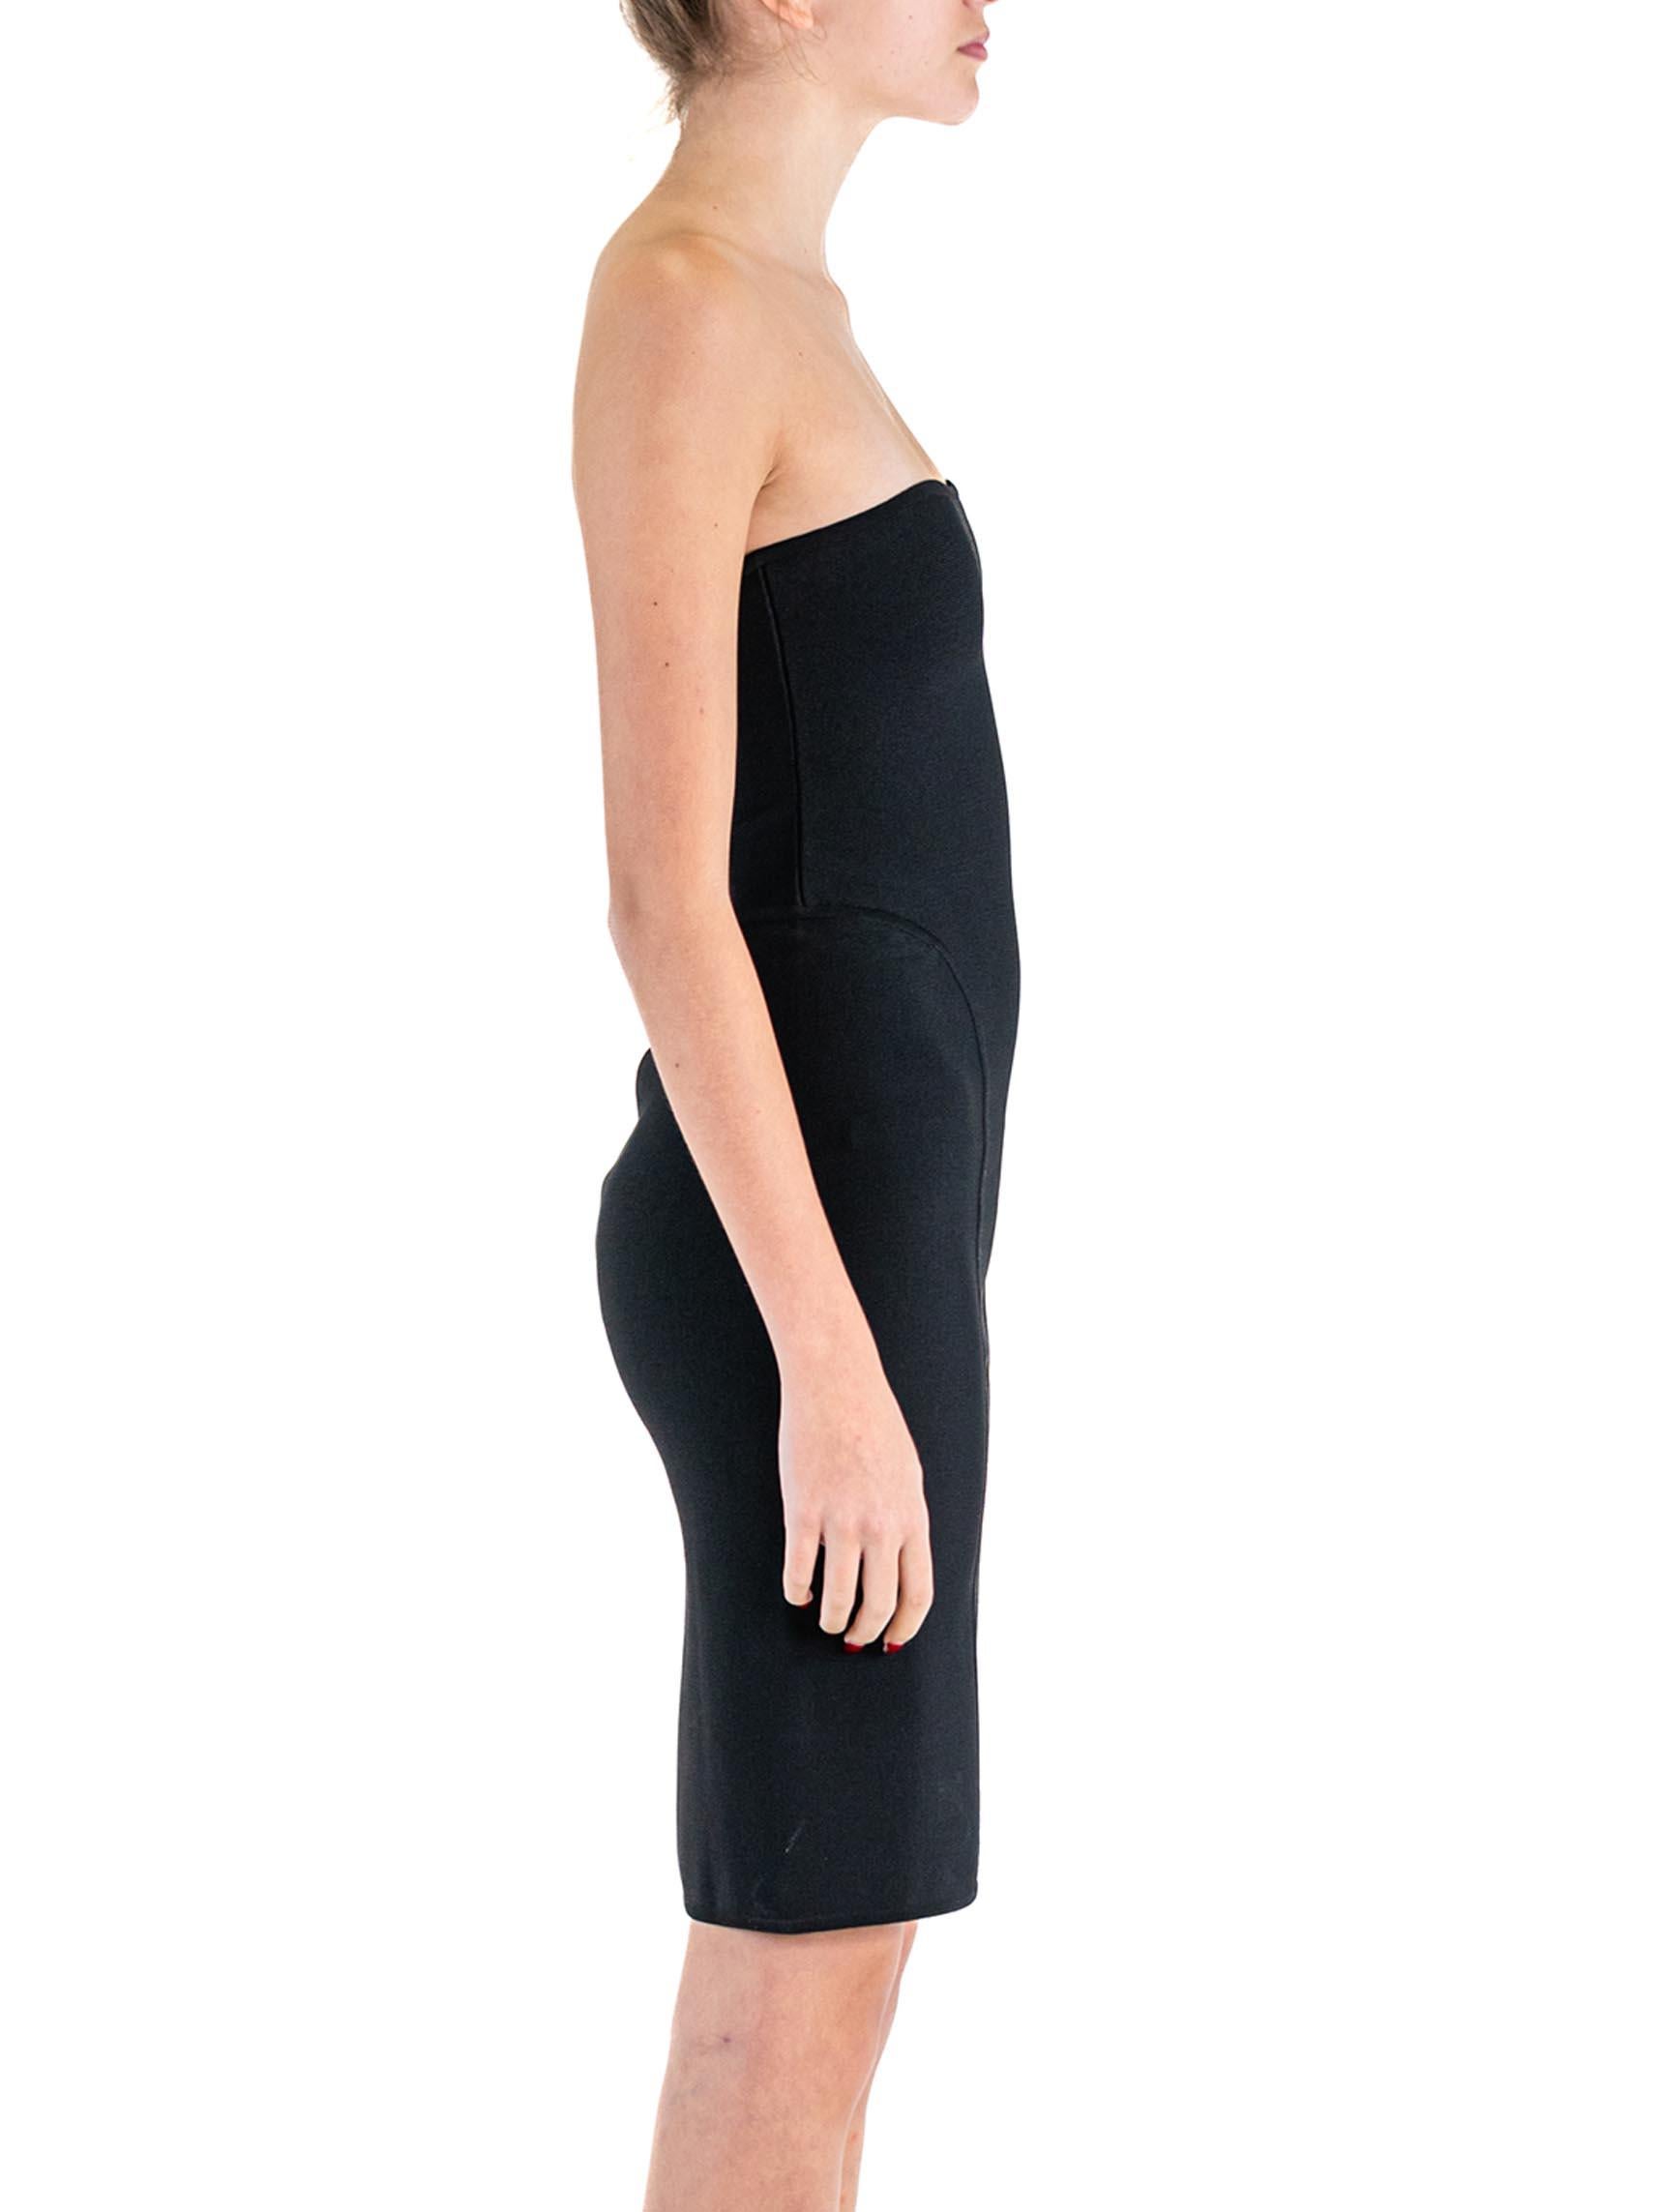 1990S Herve Leger Black Rayon& Elastane Knit Body-Con Strapless Pencil Dress In Excellent Condition For Sale In New York, NY